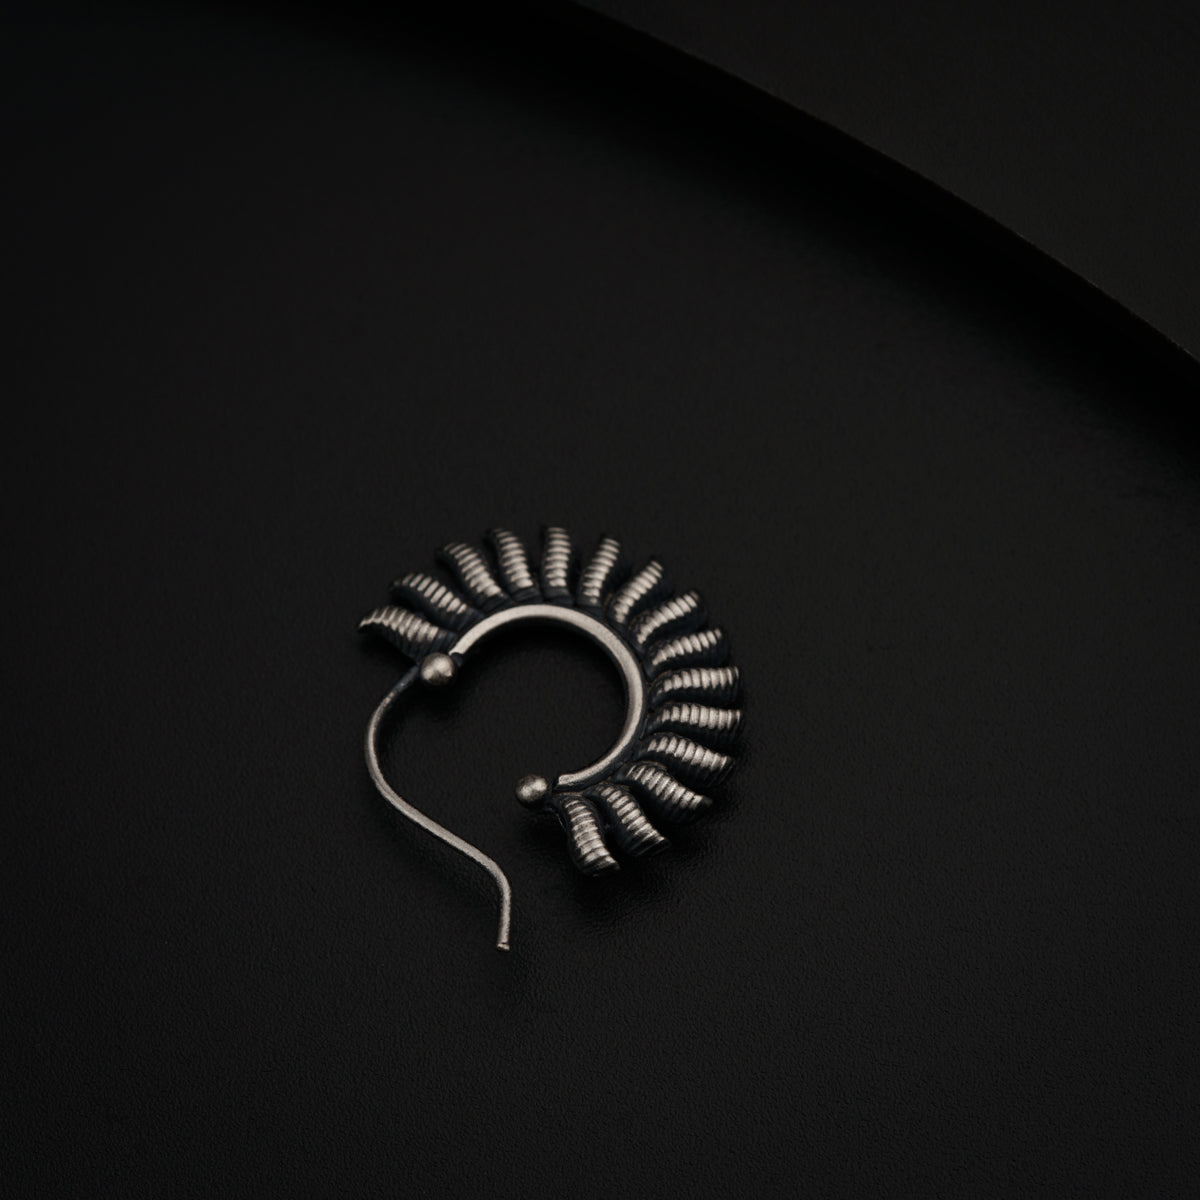 a metal object on a black surface